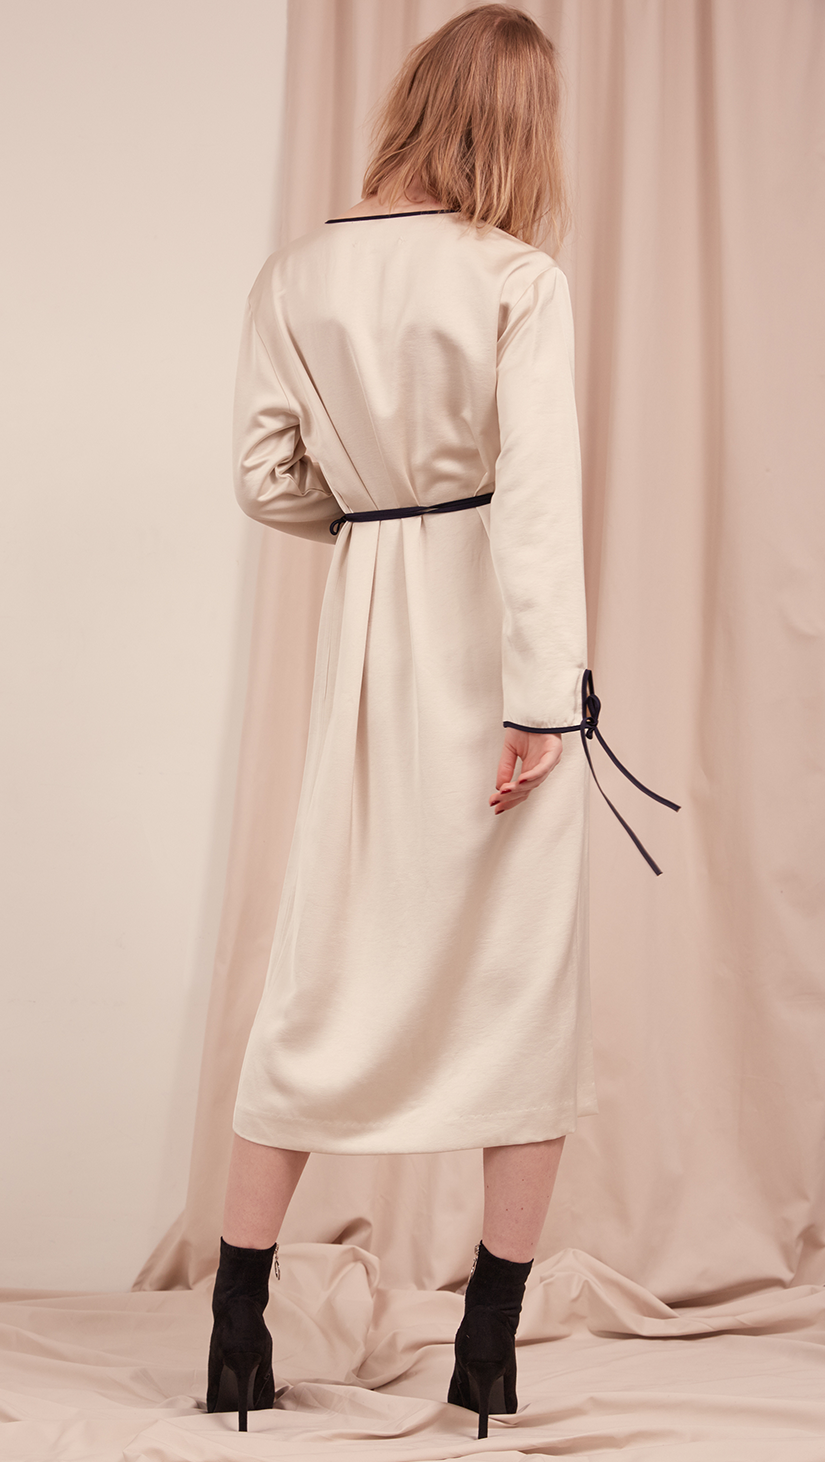 The Gabe Dress in Ivory. With wrap front, self-tie at waist. Lightweight. Super soft feel. Midi length, particularly long in length.